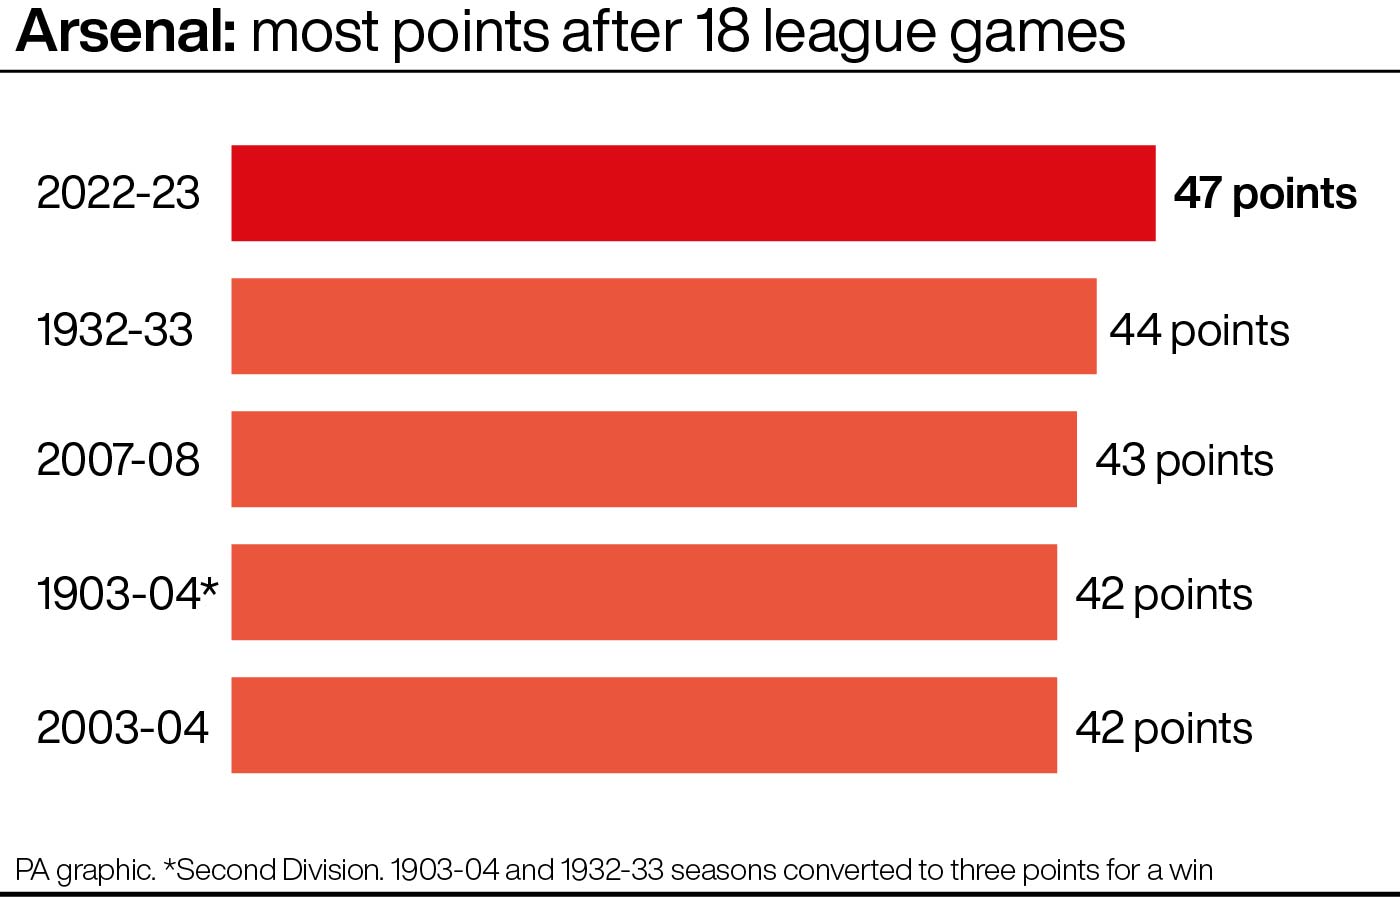 Arsenal: most points after 18 league games